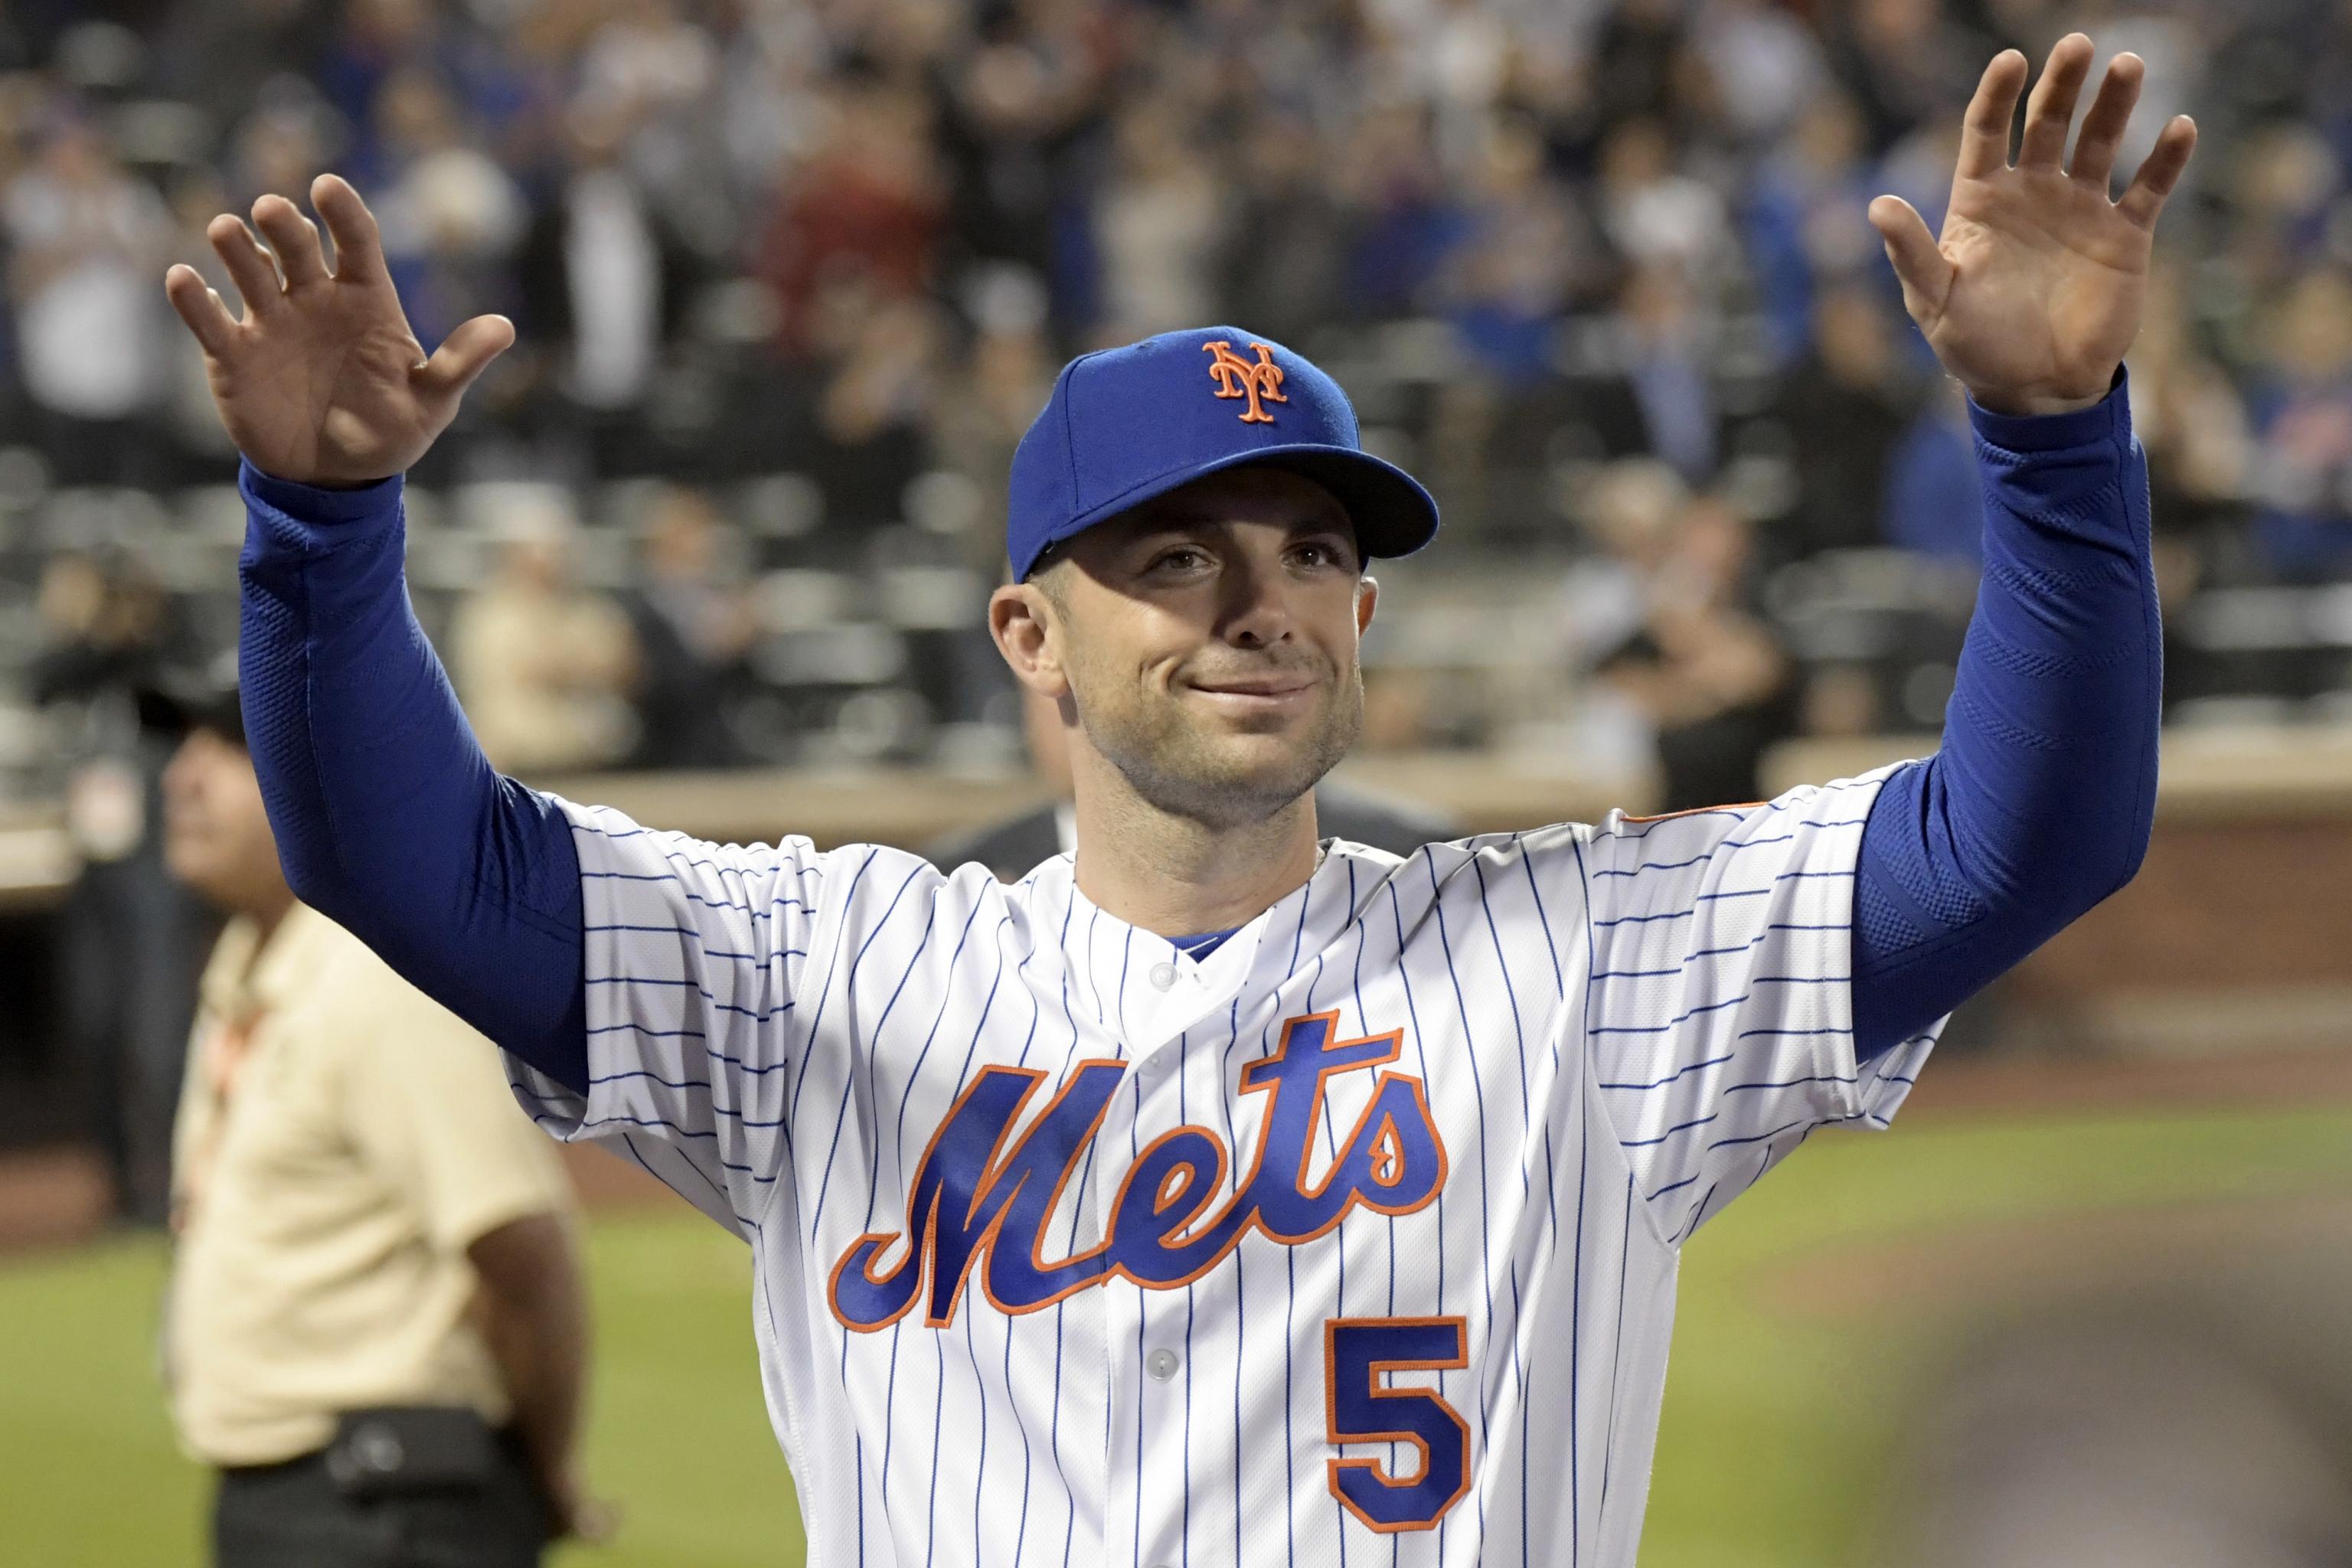 SNY on X: 20 years ago today, the Mets drafted David Wright in